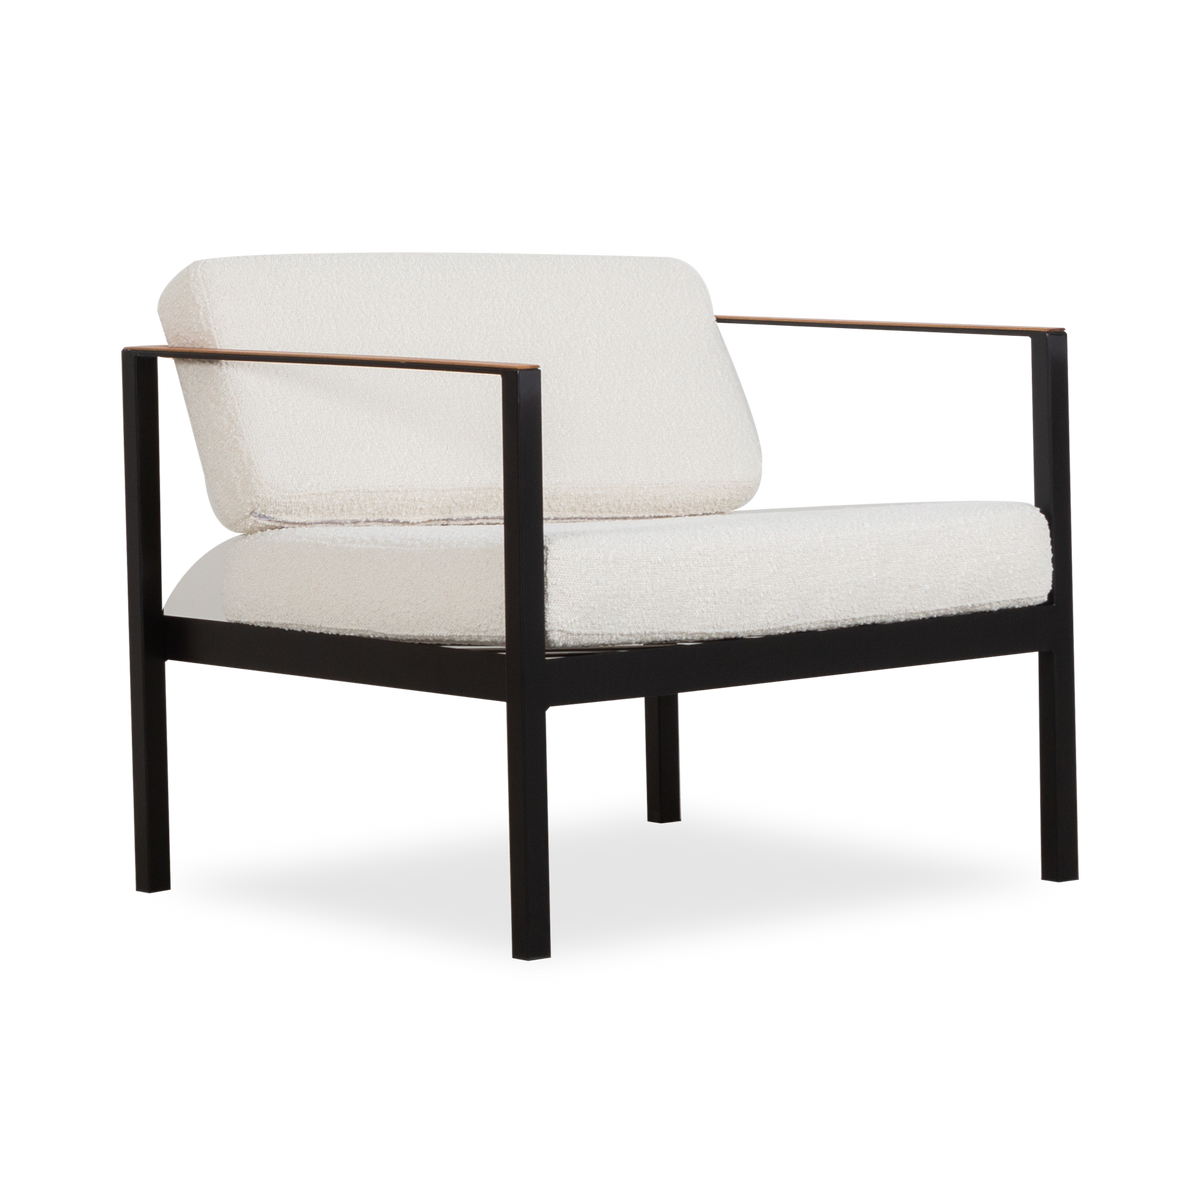 With its minimalist design, the Galvin Armchair focuses on the subtle details.